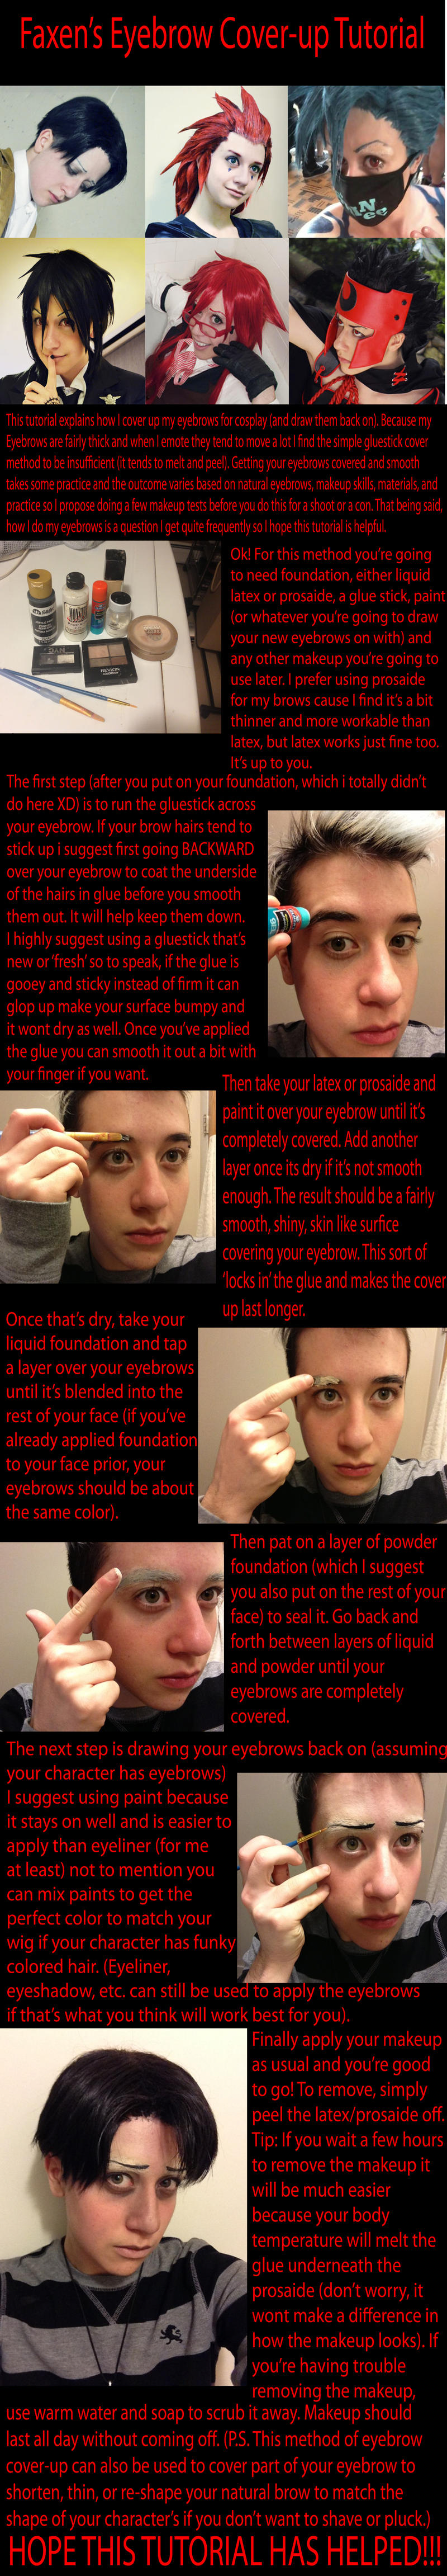 Eyebrow Cover Up Tutorial for Cosplay